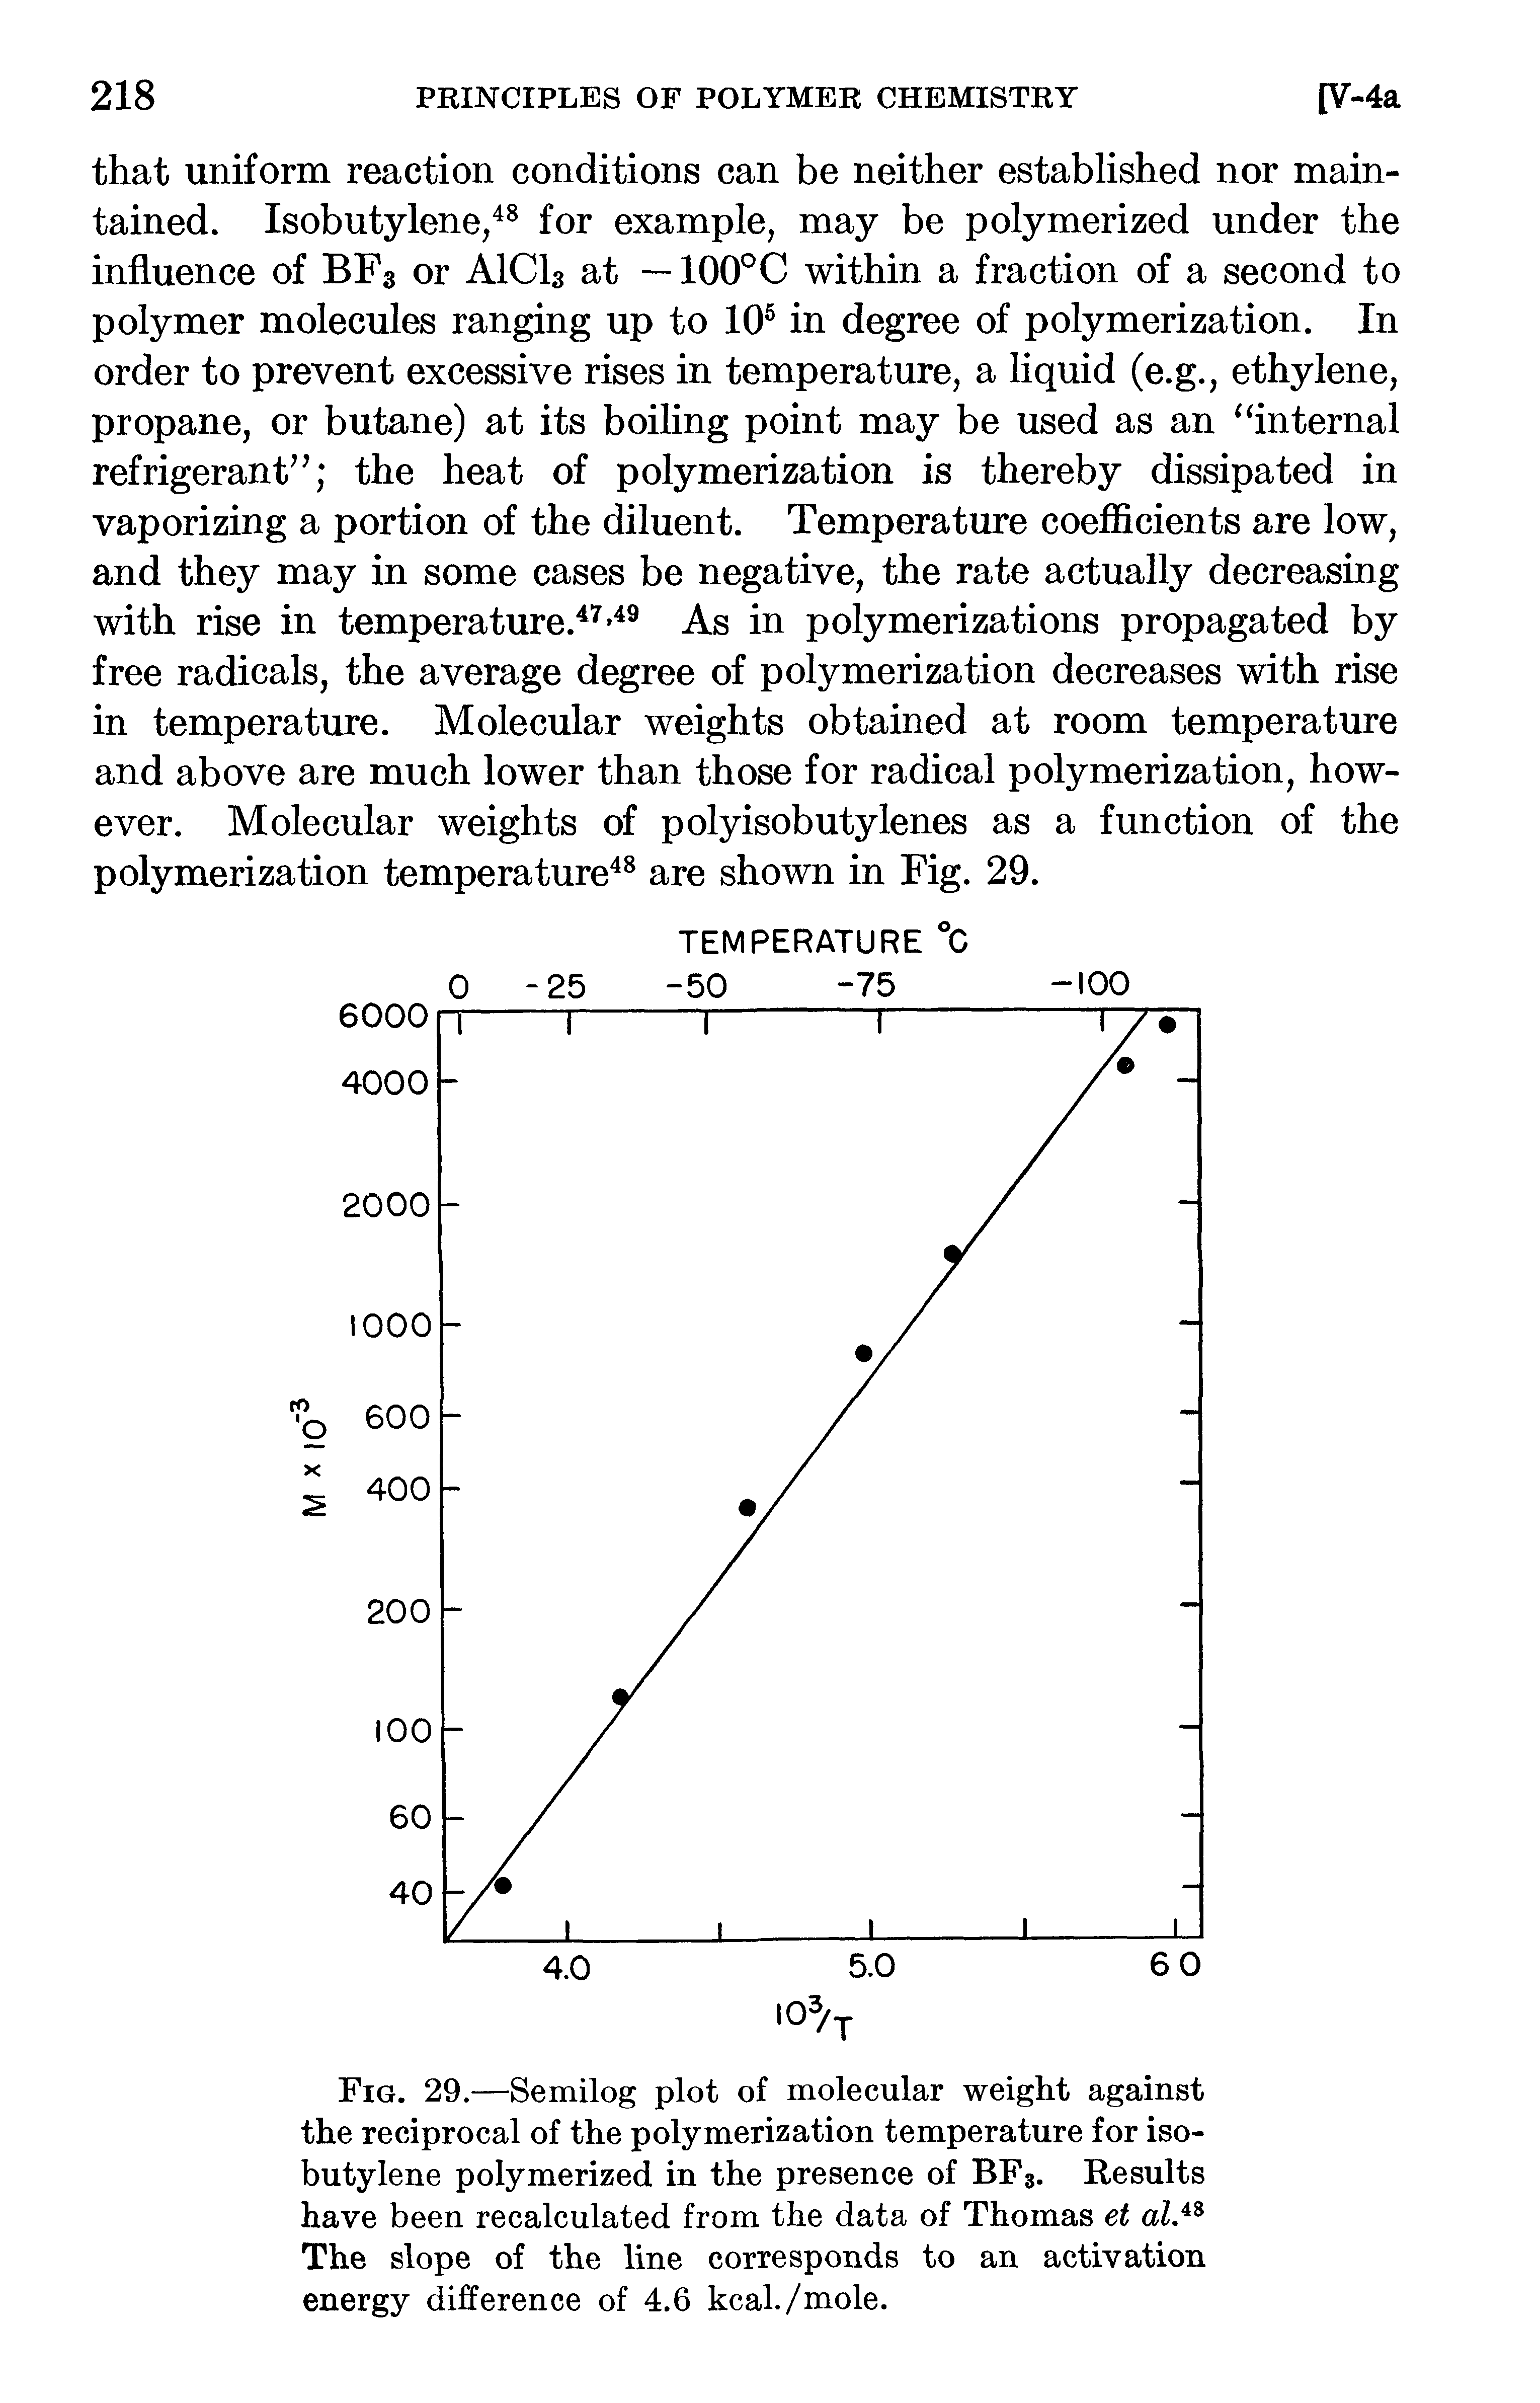 Fig. 29.—Semilog plot of molecular weight against the reciprocal of the polymerization temperature for isobutylene polymerized in the presence of BF3. Results have been recalculated from the data of Thomas et al. The slope of the line corresponds to an activation energy difference of 4.6 kcal./mole.